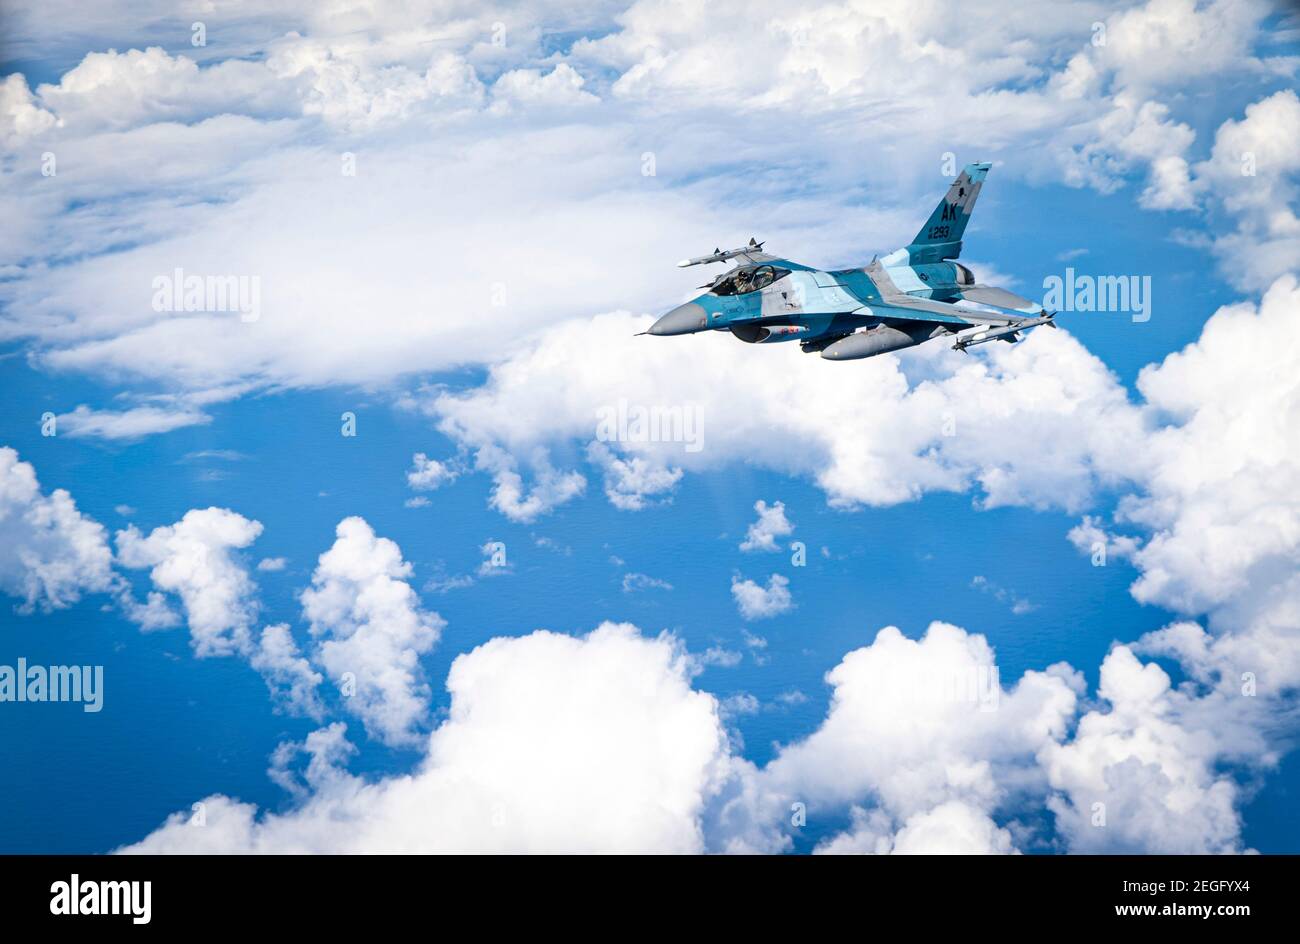 Guam, United States. 18th Feb, 2021. A U.S. Air Force F-16 Fighting Falcon fighter jet, assigned to the 18th Aggressor Squadron, during exercise Cope North 21 February 18, 2021 near Guam. Cope North is an annual exercise was allies in the Indo-Pacific. Credit: Planetpix/Alamy Live News Stock Photo